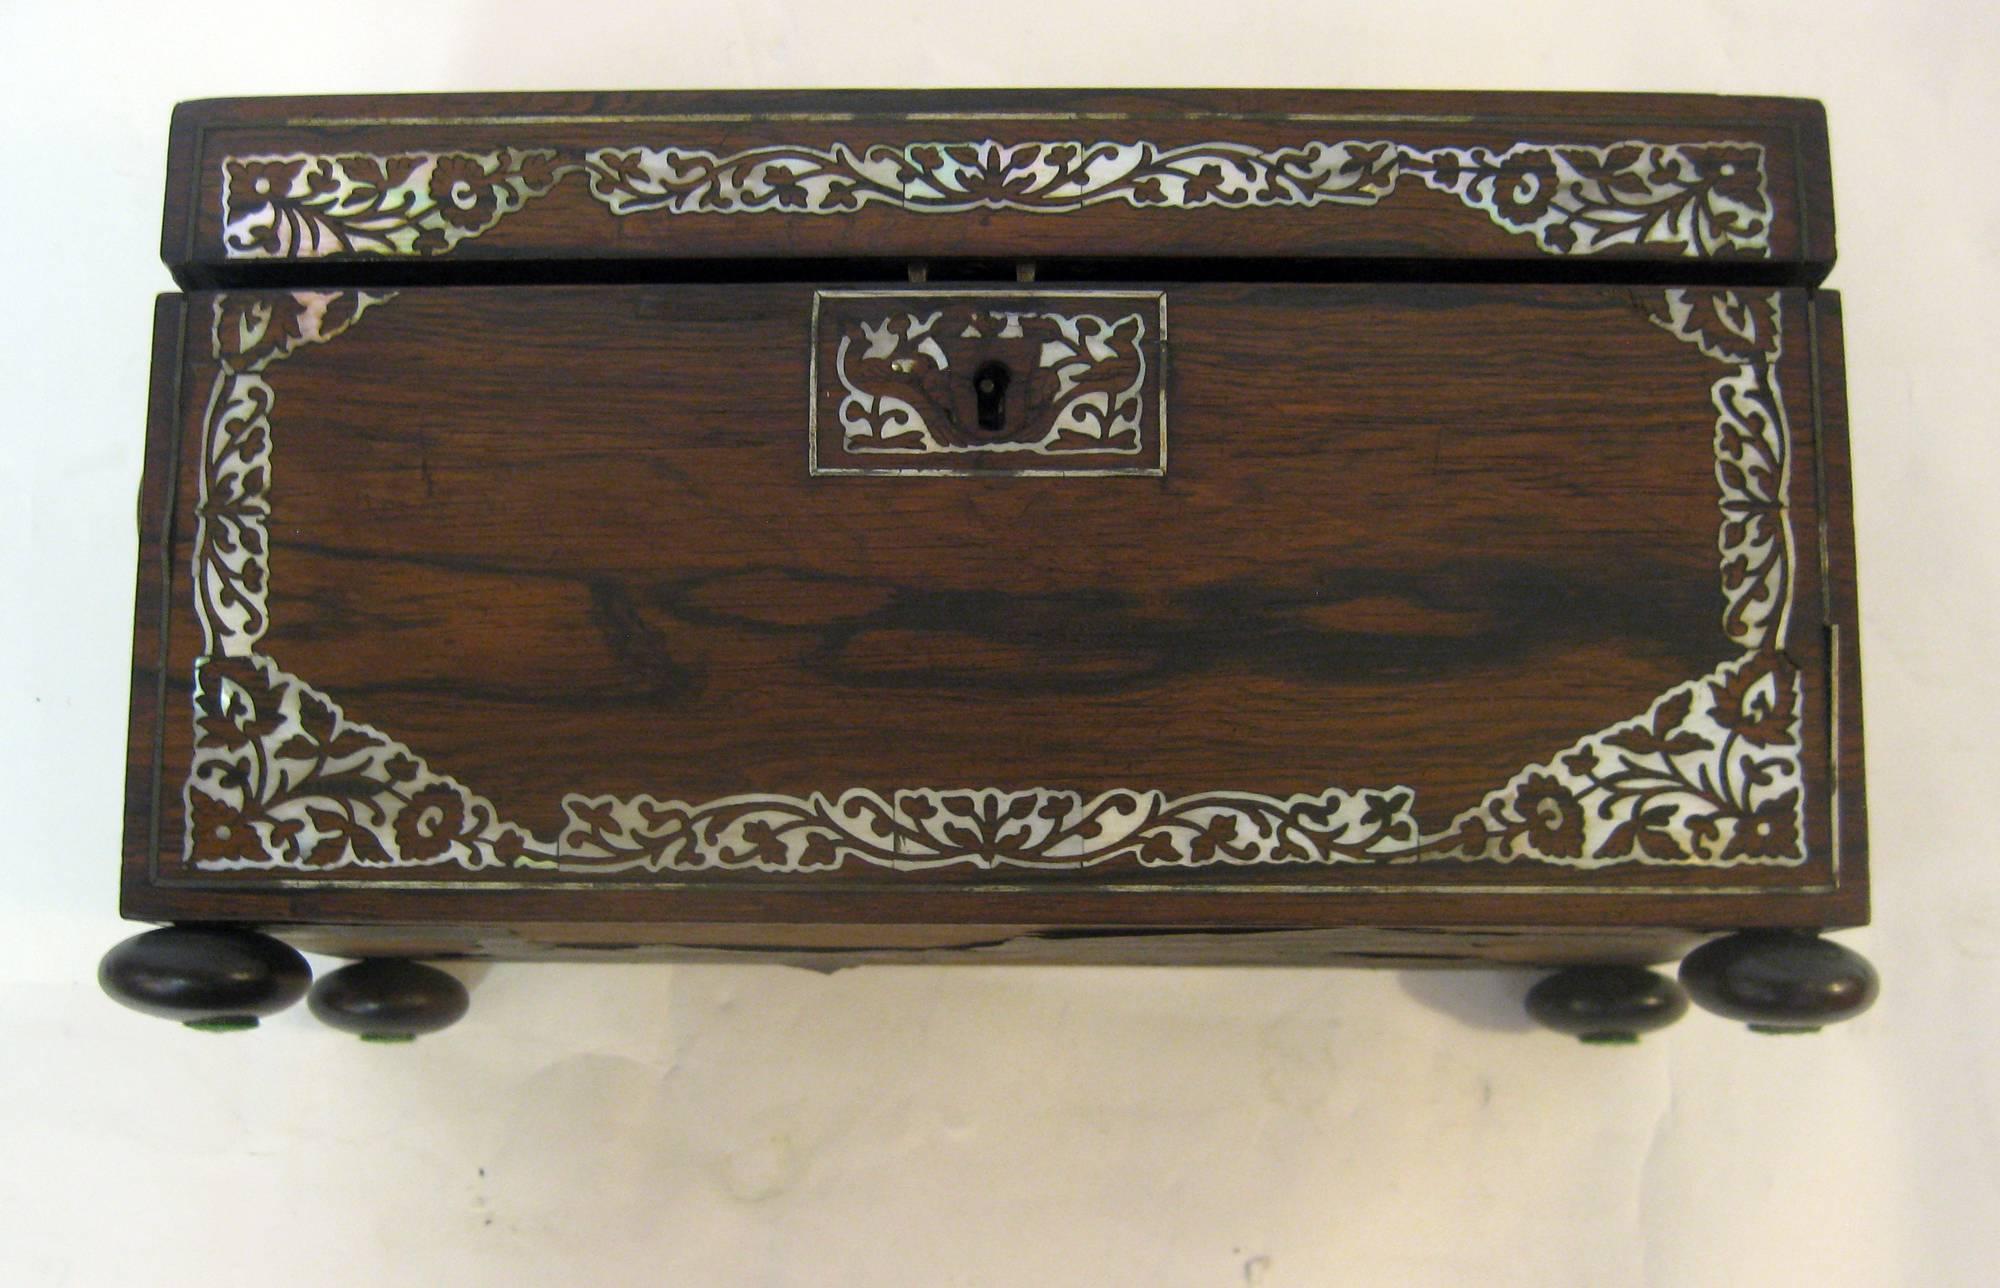 Tea Caddy made of rosewood with extensive mother-of-pearl decoration to the top and front. Special features include bun feet and unusual handles on either side with mother-of-pearl buttons. The interior has two hinged lidded canisters and a center